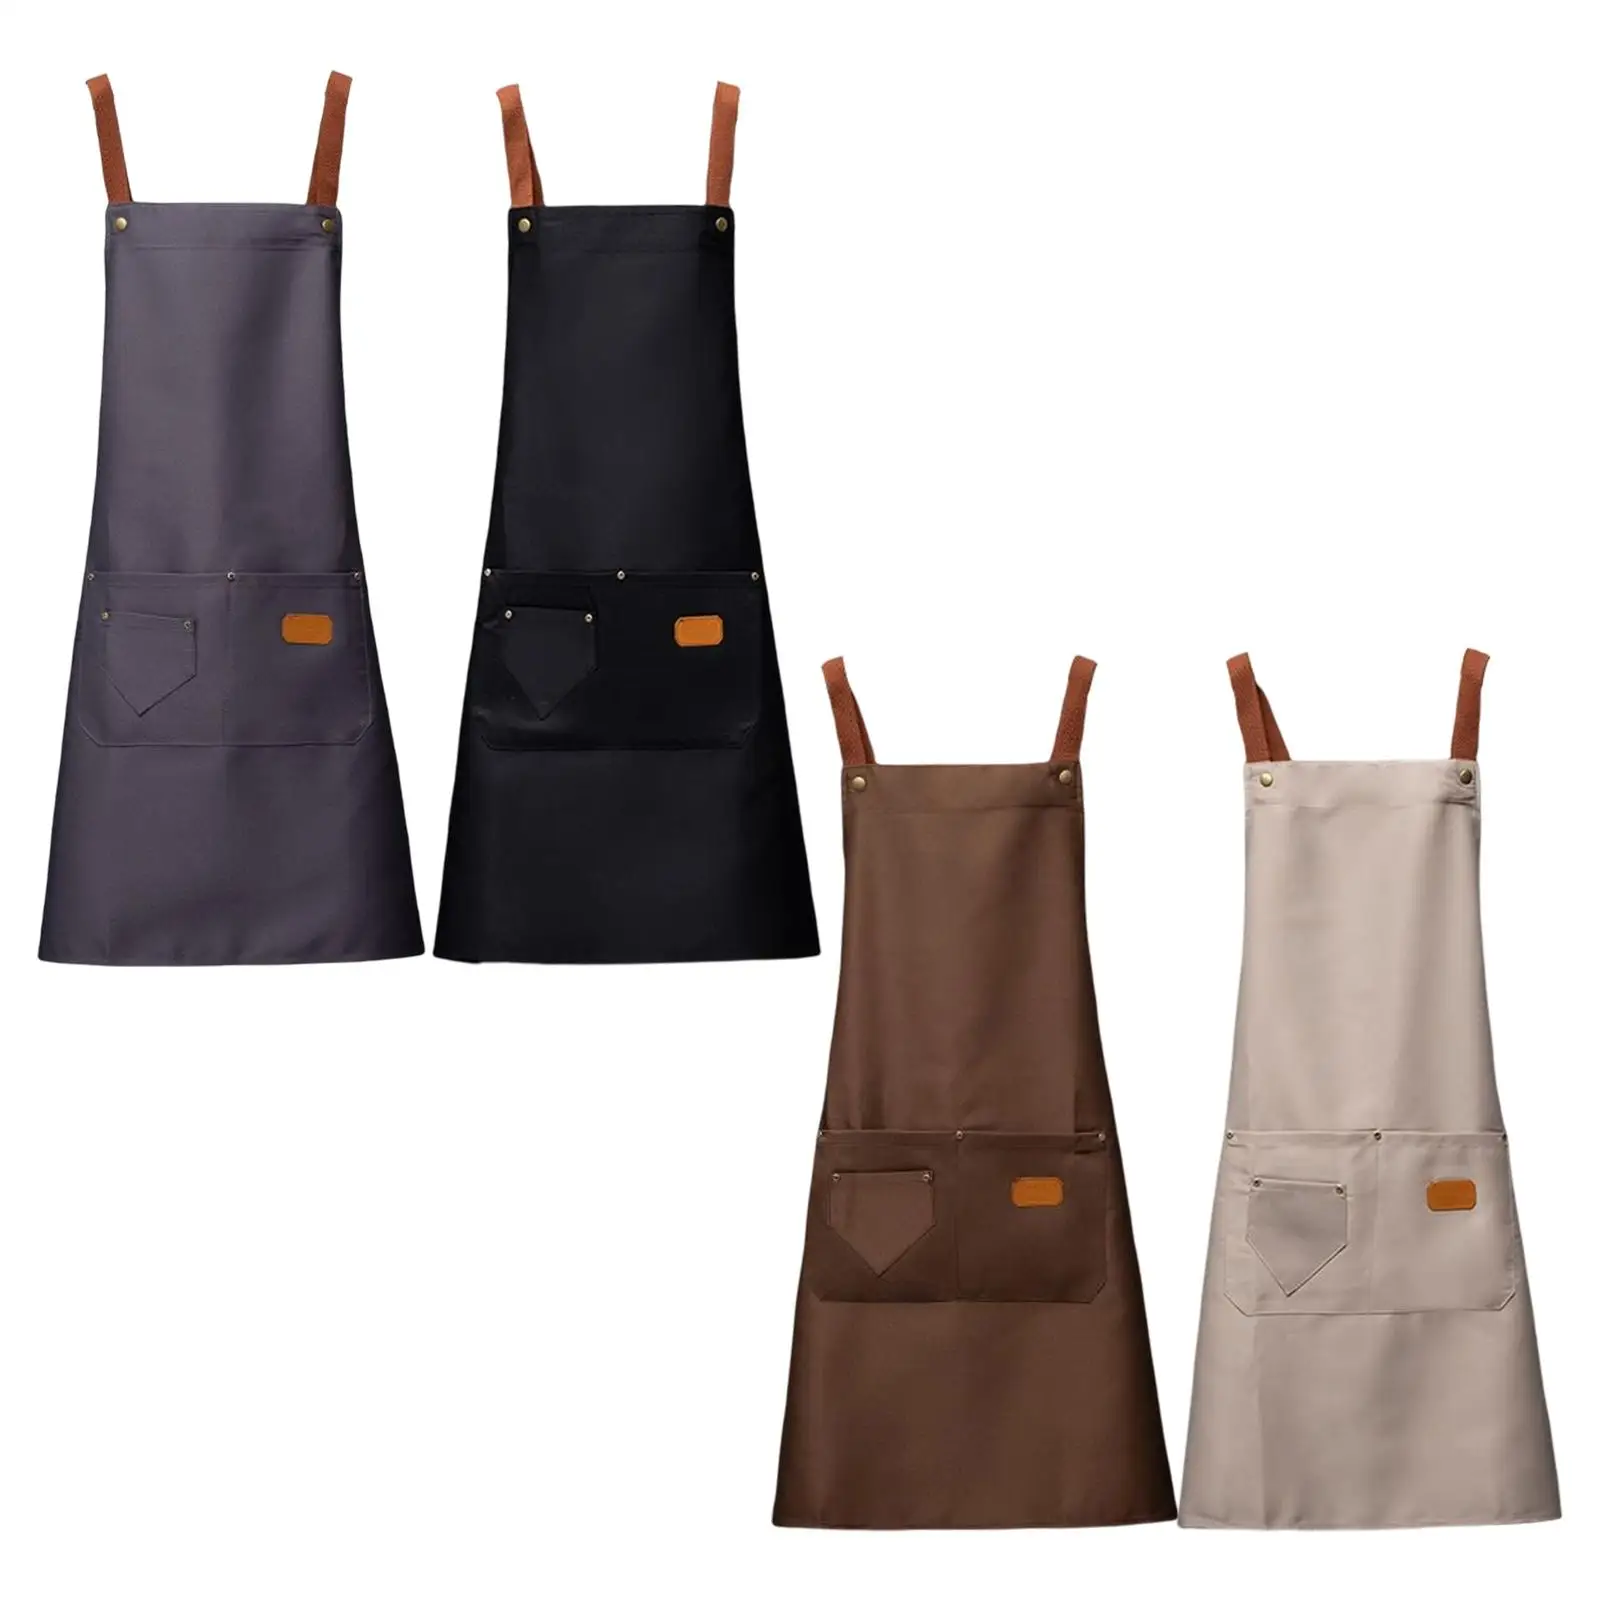 

Bib Apron Commercial Water Oil Stain Resistant Unisex Cooking Kitchen Apron for Restaurant Gardening Drawing Grilling Chef Apron